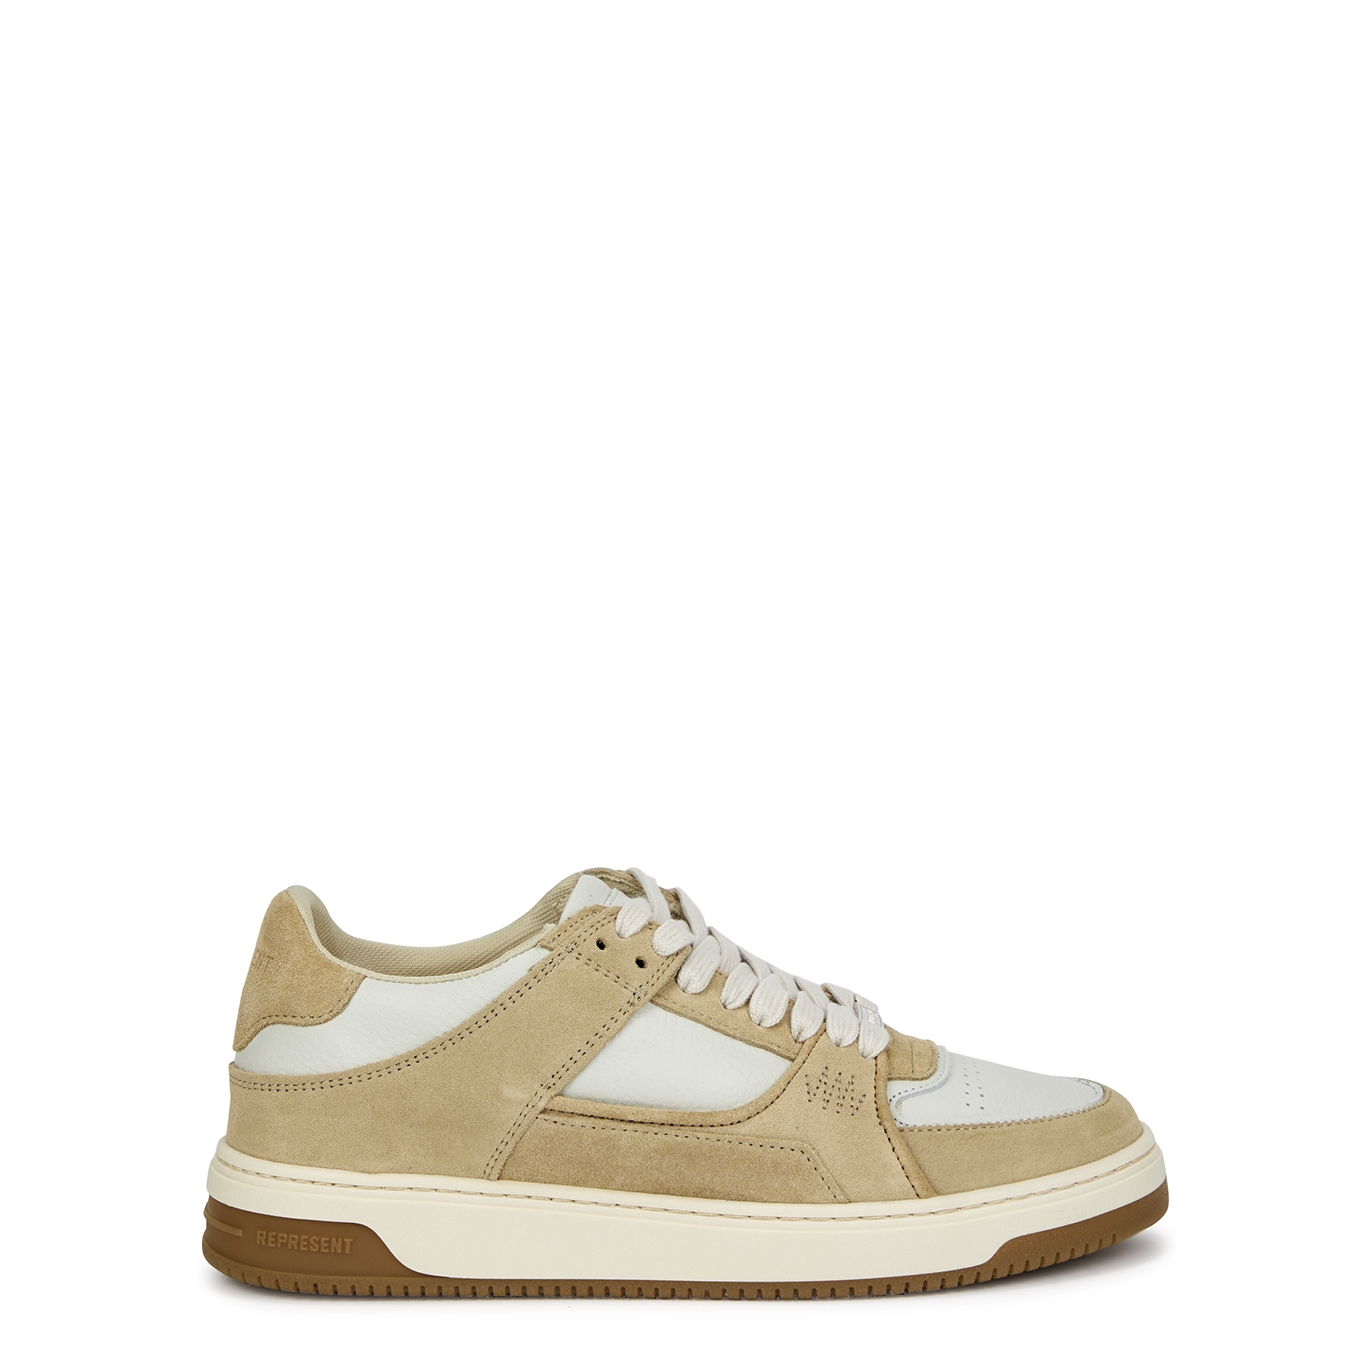 Represent Apex Panelled Leather Sneakers - Taupe - 11